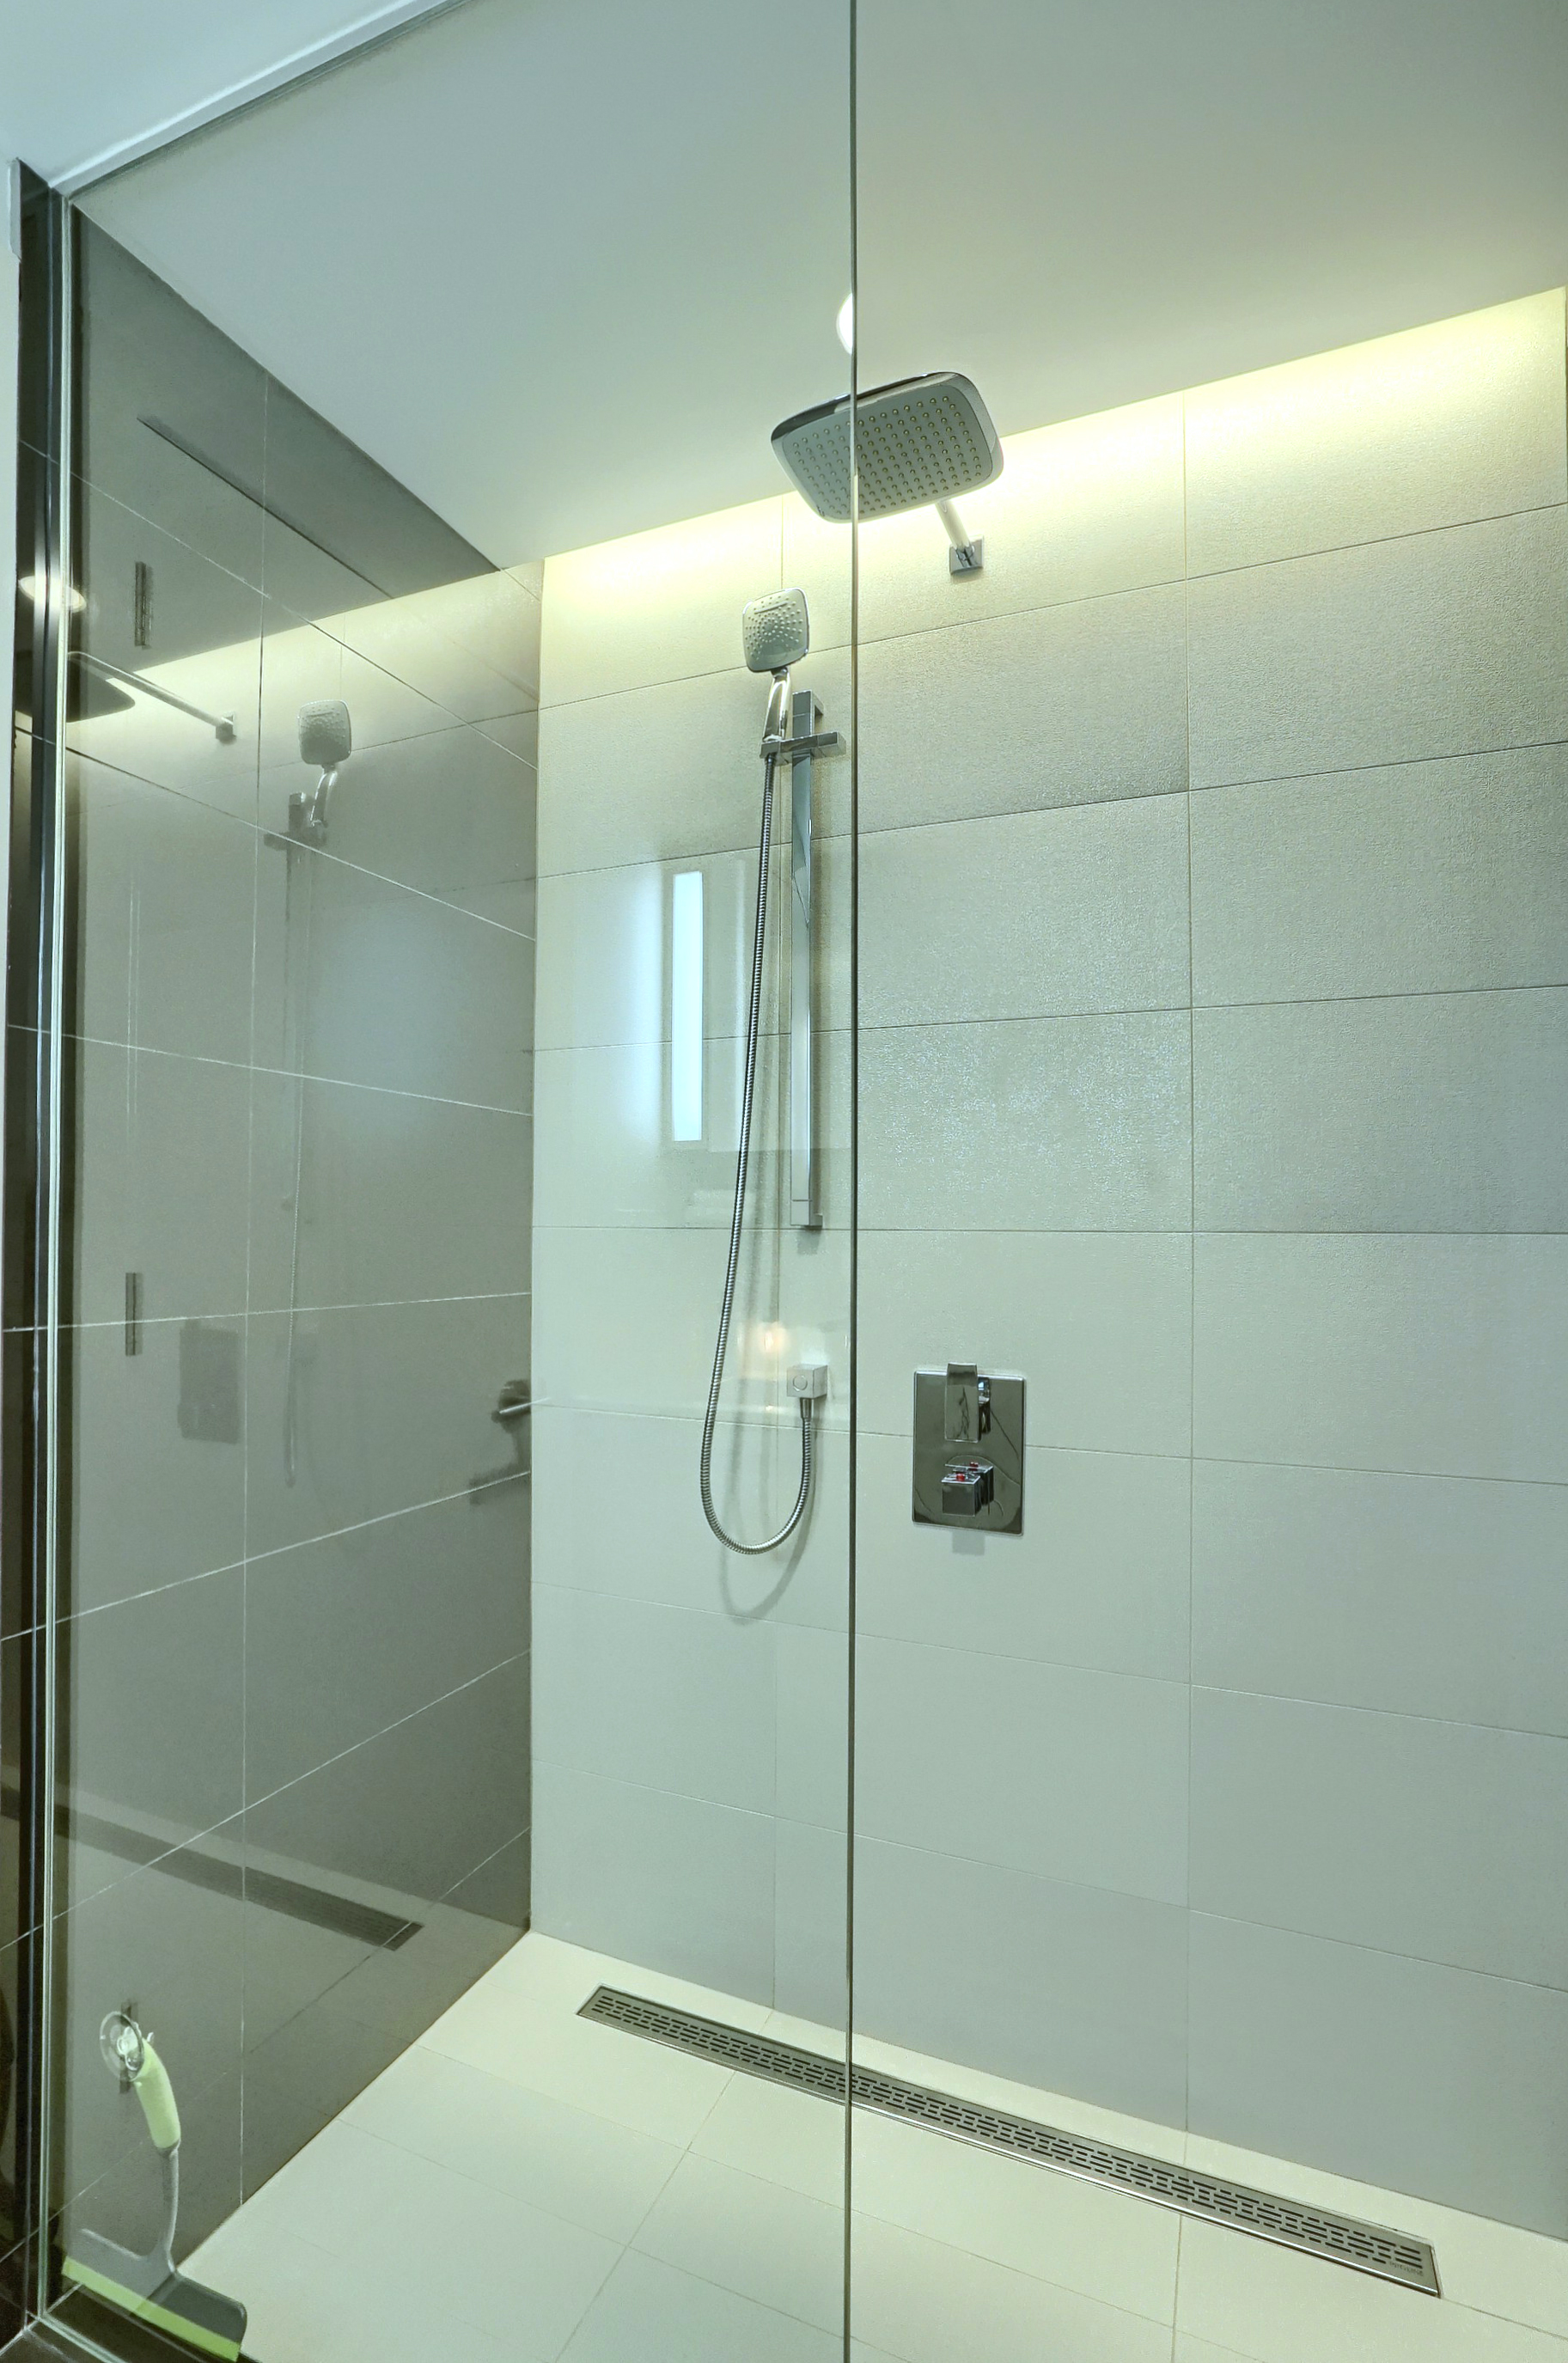 Angled view of the floor-to-ceiling glass shower with adjustable shower head. For cleaning convenience, there is a designer glass cleaning tool. White and gray sleek tile. Spacious modern bathroom in this furnished rental, short term, in montreal